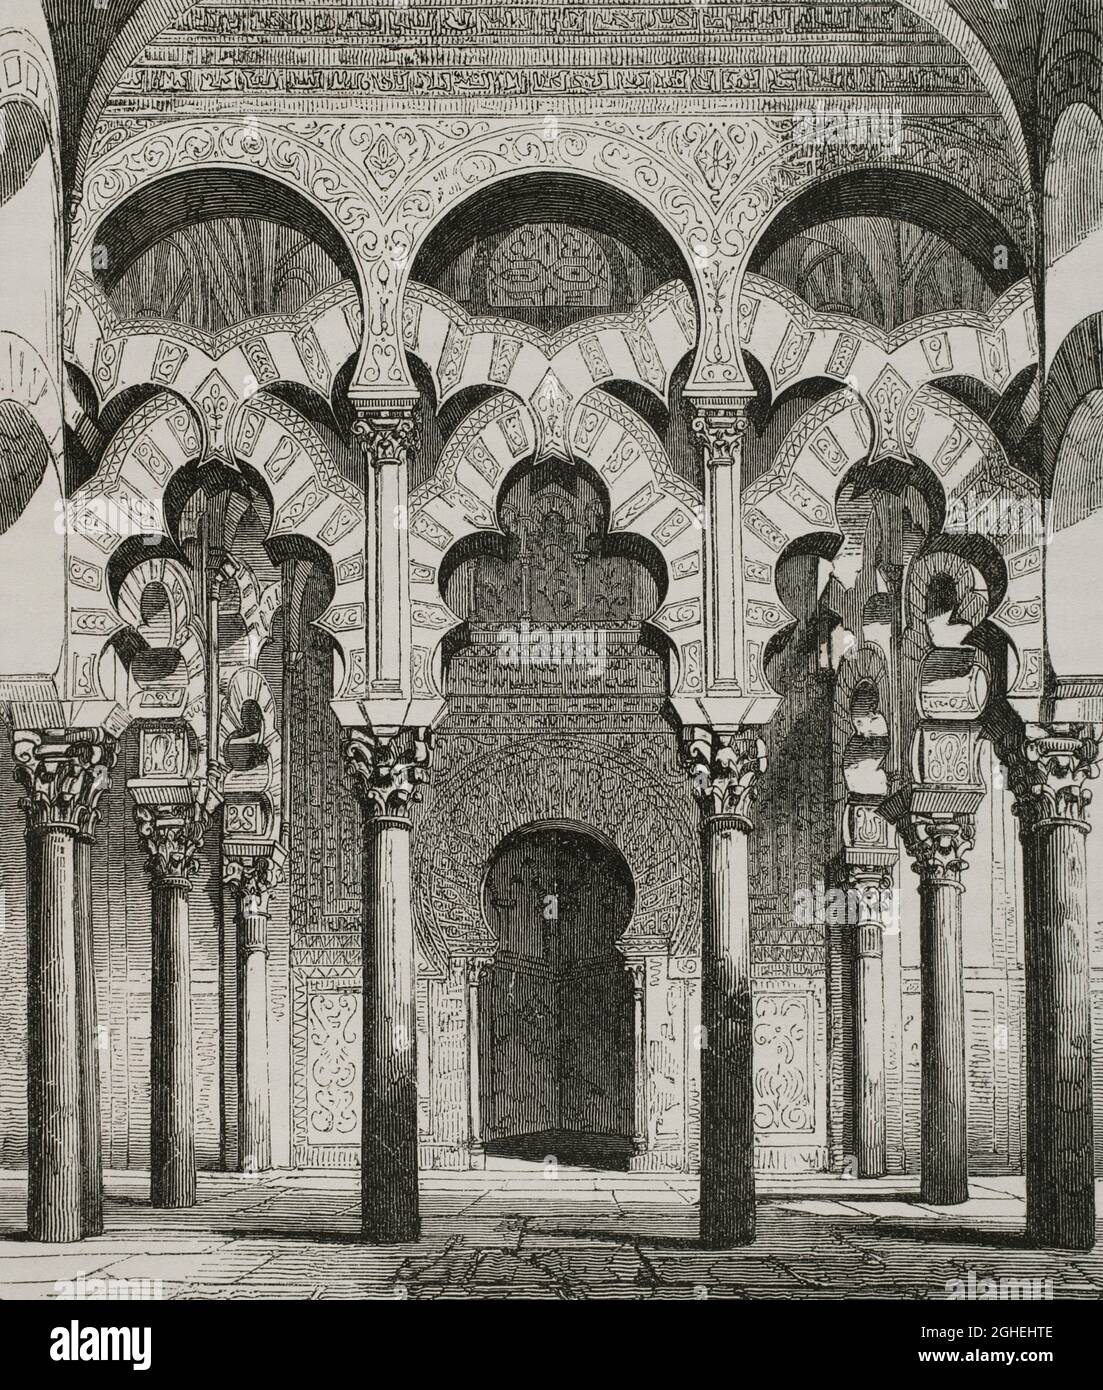 Spain, Andalusia, Cordoba. Great Mosque of Cordoba or Cathedral of Our Lady of the Assumption. Interior. Lobed arches in the anteroom of the Mihrab. Engraving. Las Glorias Nacionales. Volume III, Madrid-Barcelona edition, 1853. Stock Photo